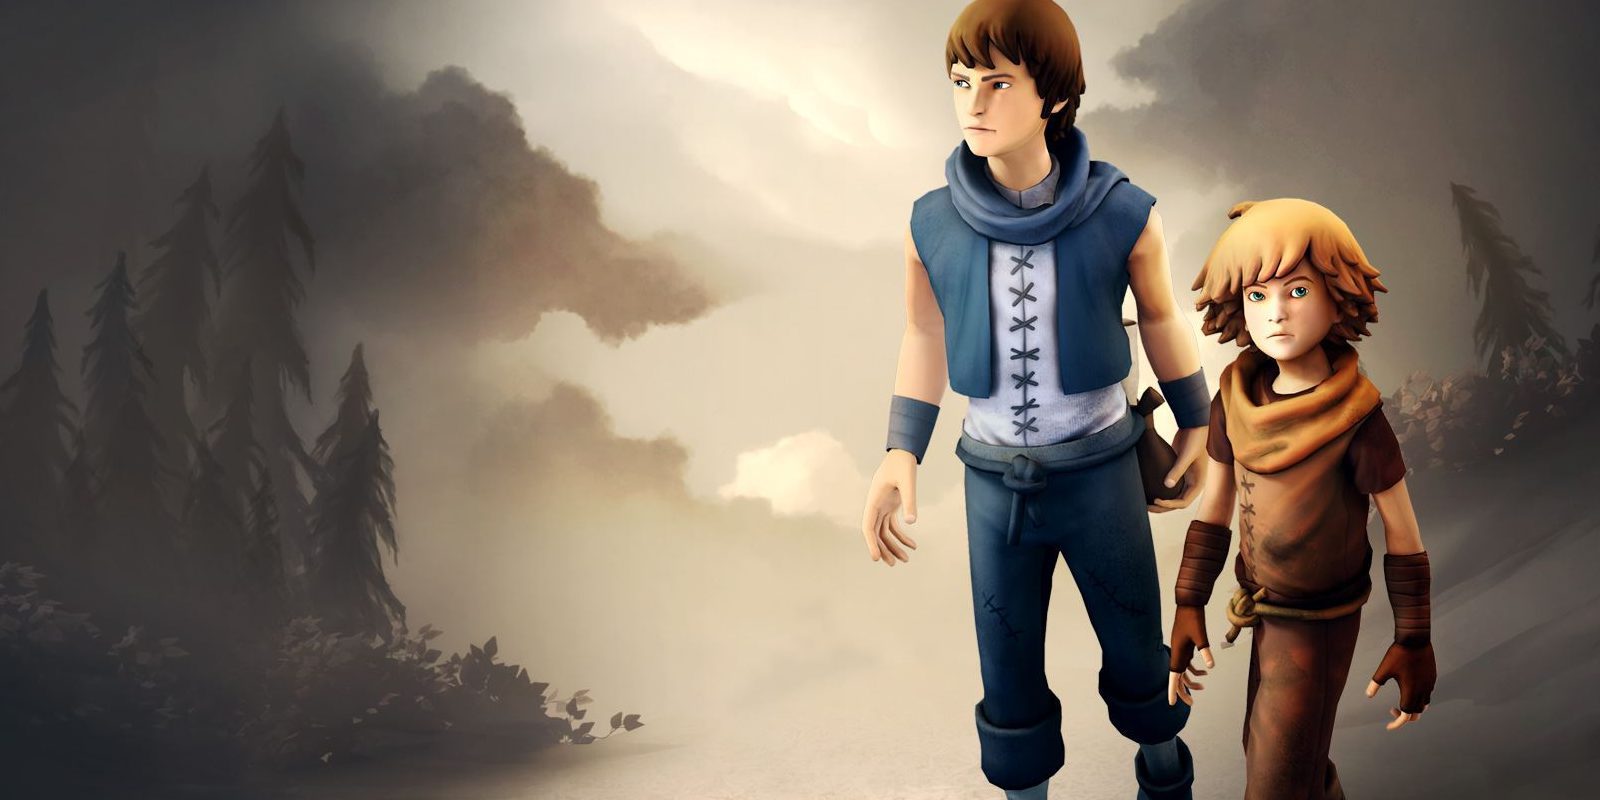 Brothers a tale андроид. Brothers: a Tale of two sons. A Tale of two sons обои. Brothers: a Tale of two sons Switch.